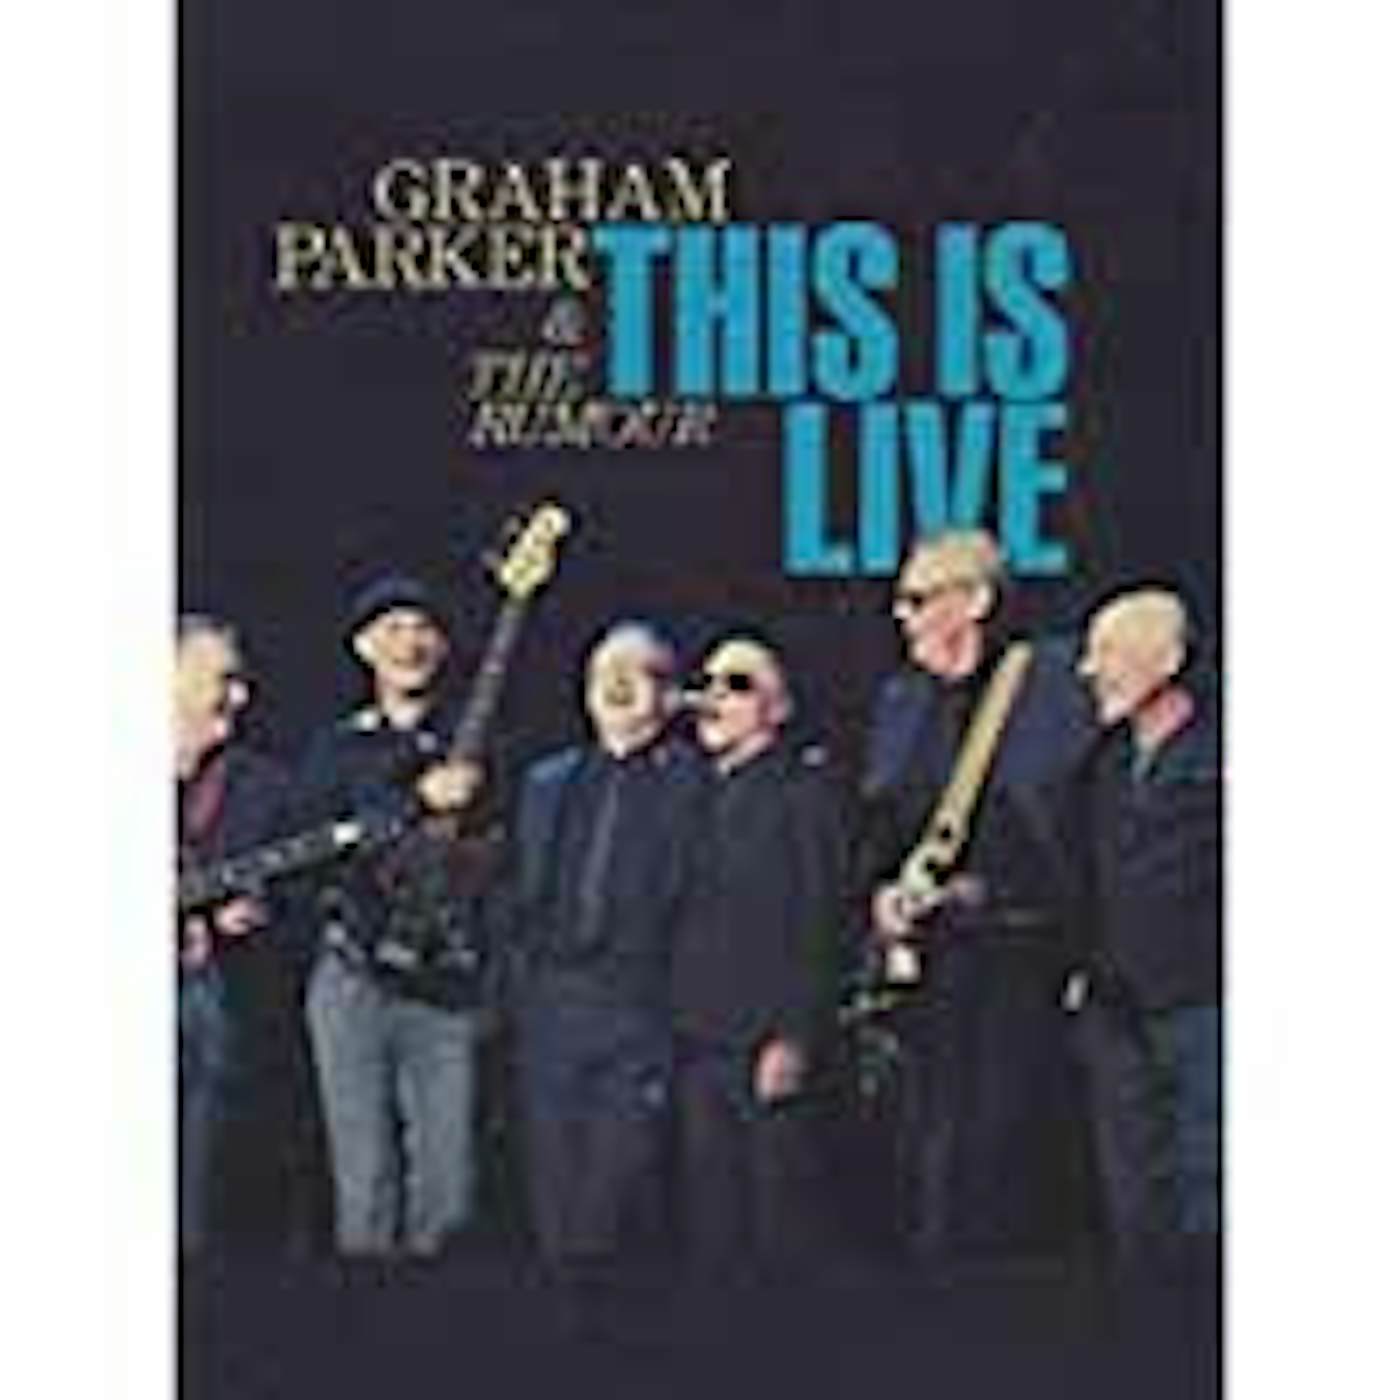 Graham Parker DVD - This Is Live